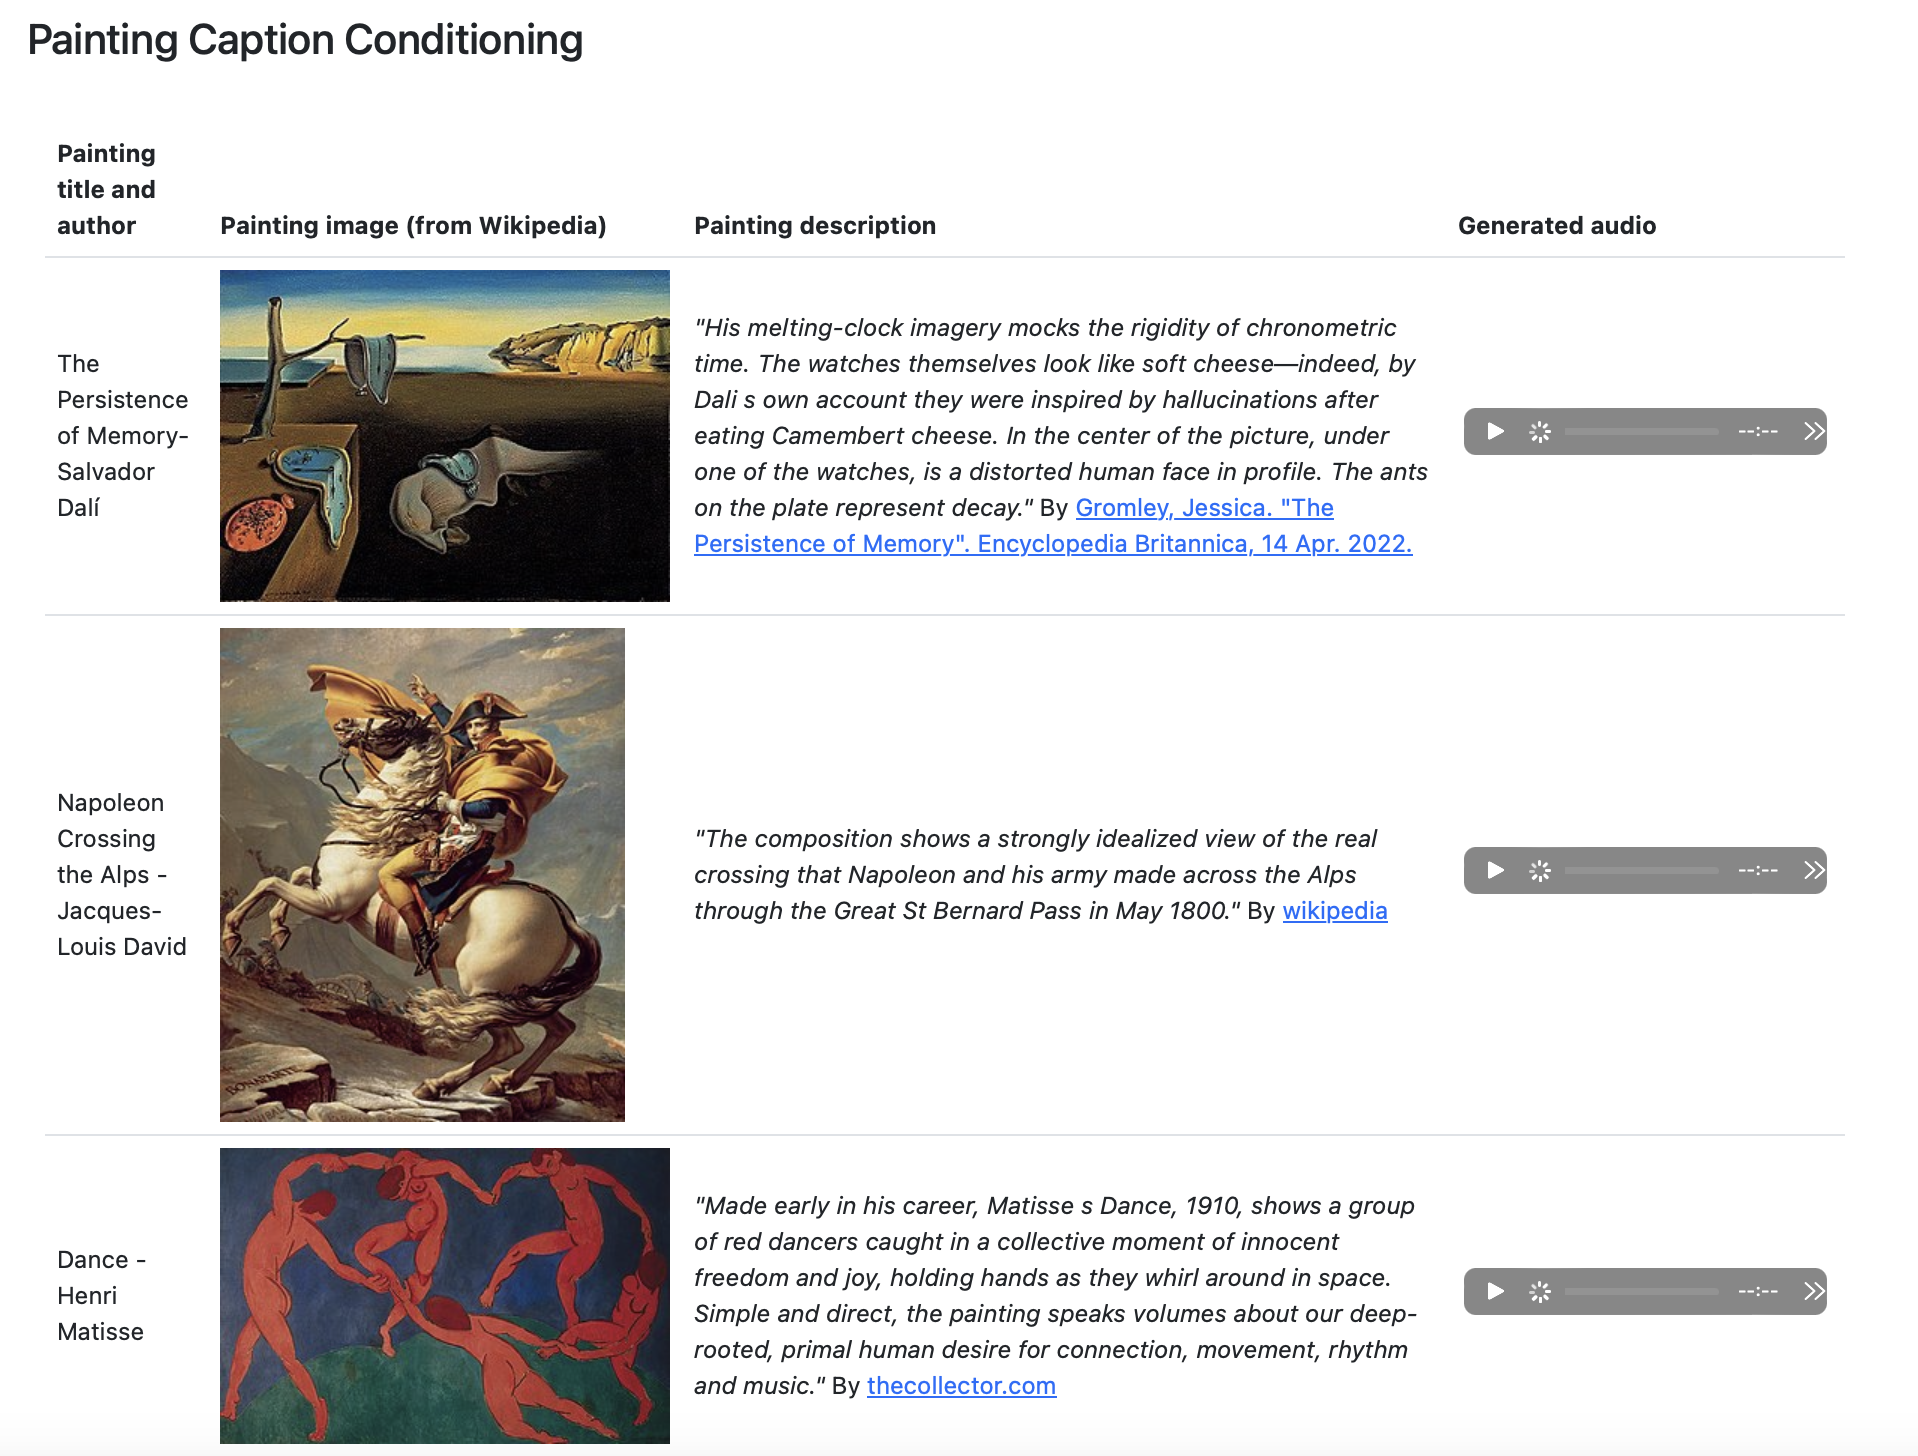 A screenshot of Google's Music LM's examples of Painting Captioning Conditioning — Dali's the Persistence of Memory, a portrait of Napoleon, and Henri Matisse's Dance are all converted to captions and then music is created from the captions